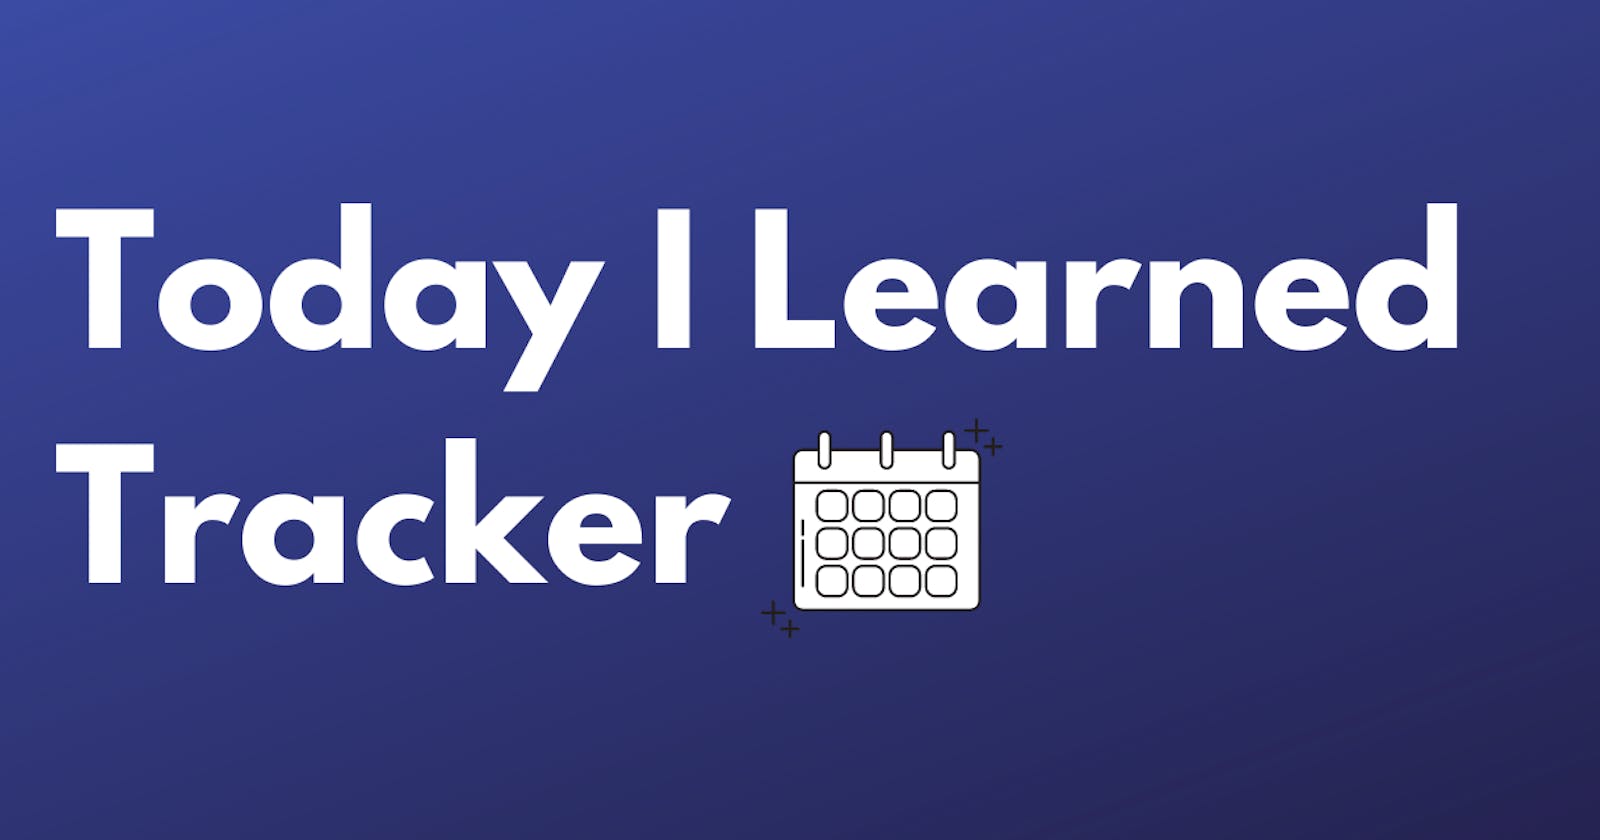 Presenting The "Today I Learned" Tracker!